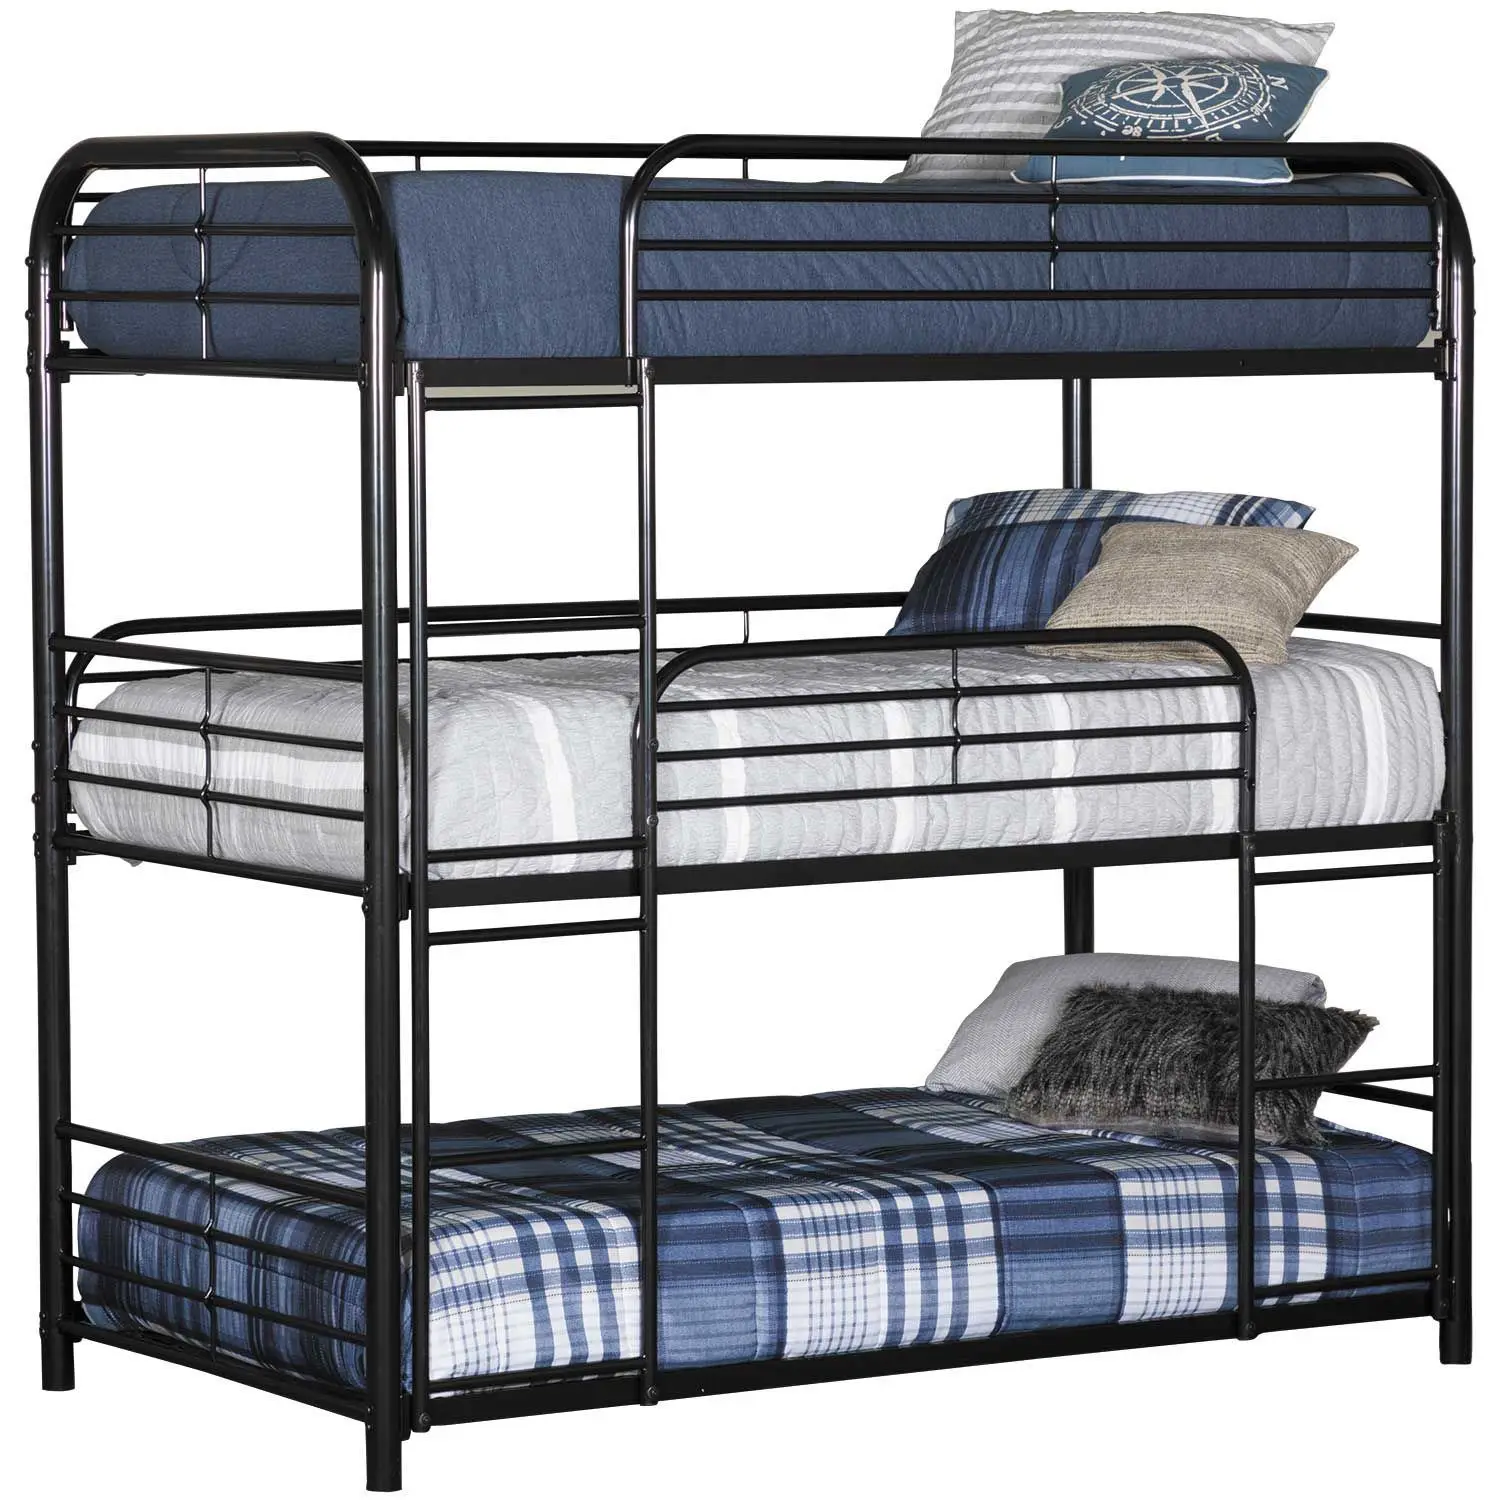 cheap bunk beds for sale near me